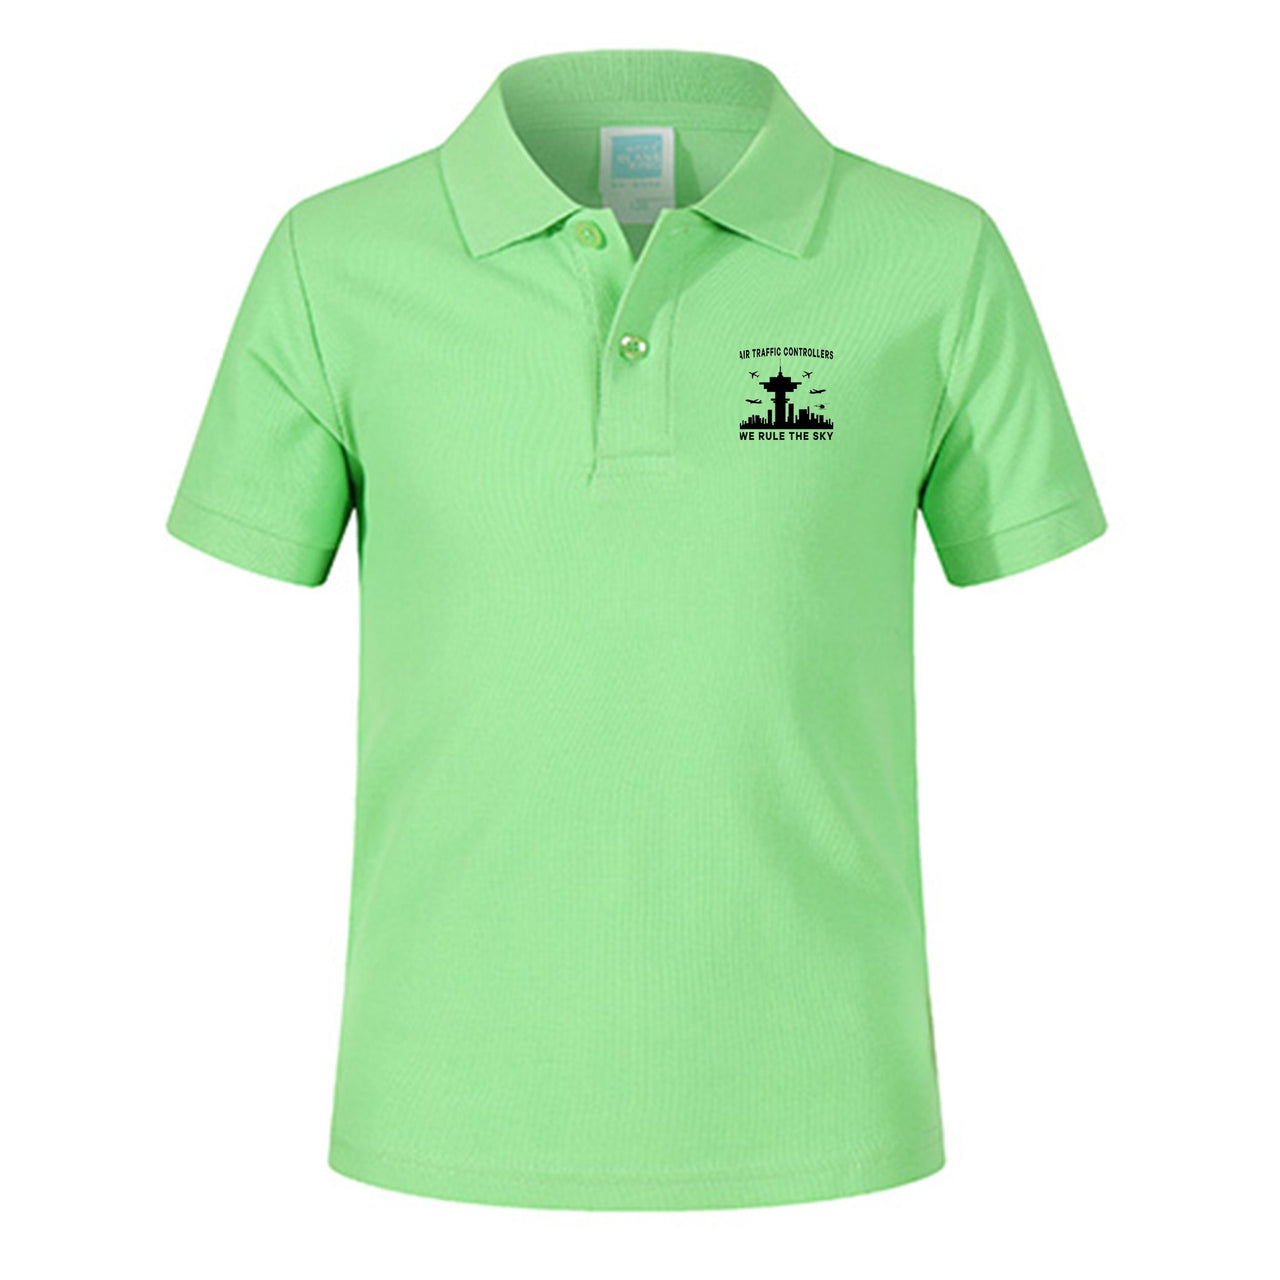 Air Traffic Controllers - We Rule The Sky Designed Children Polo T-Shirts